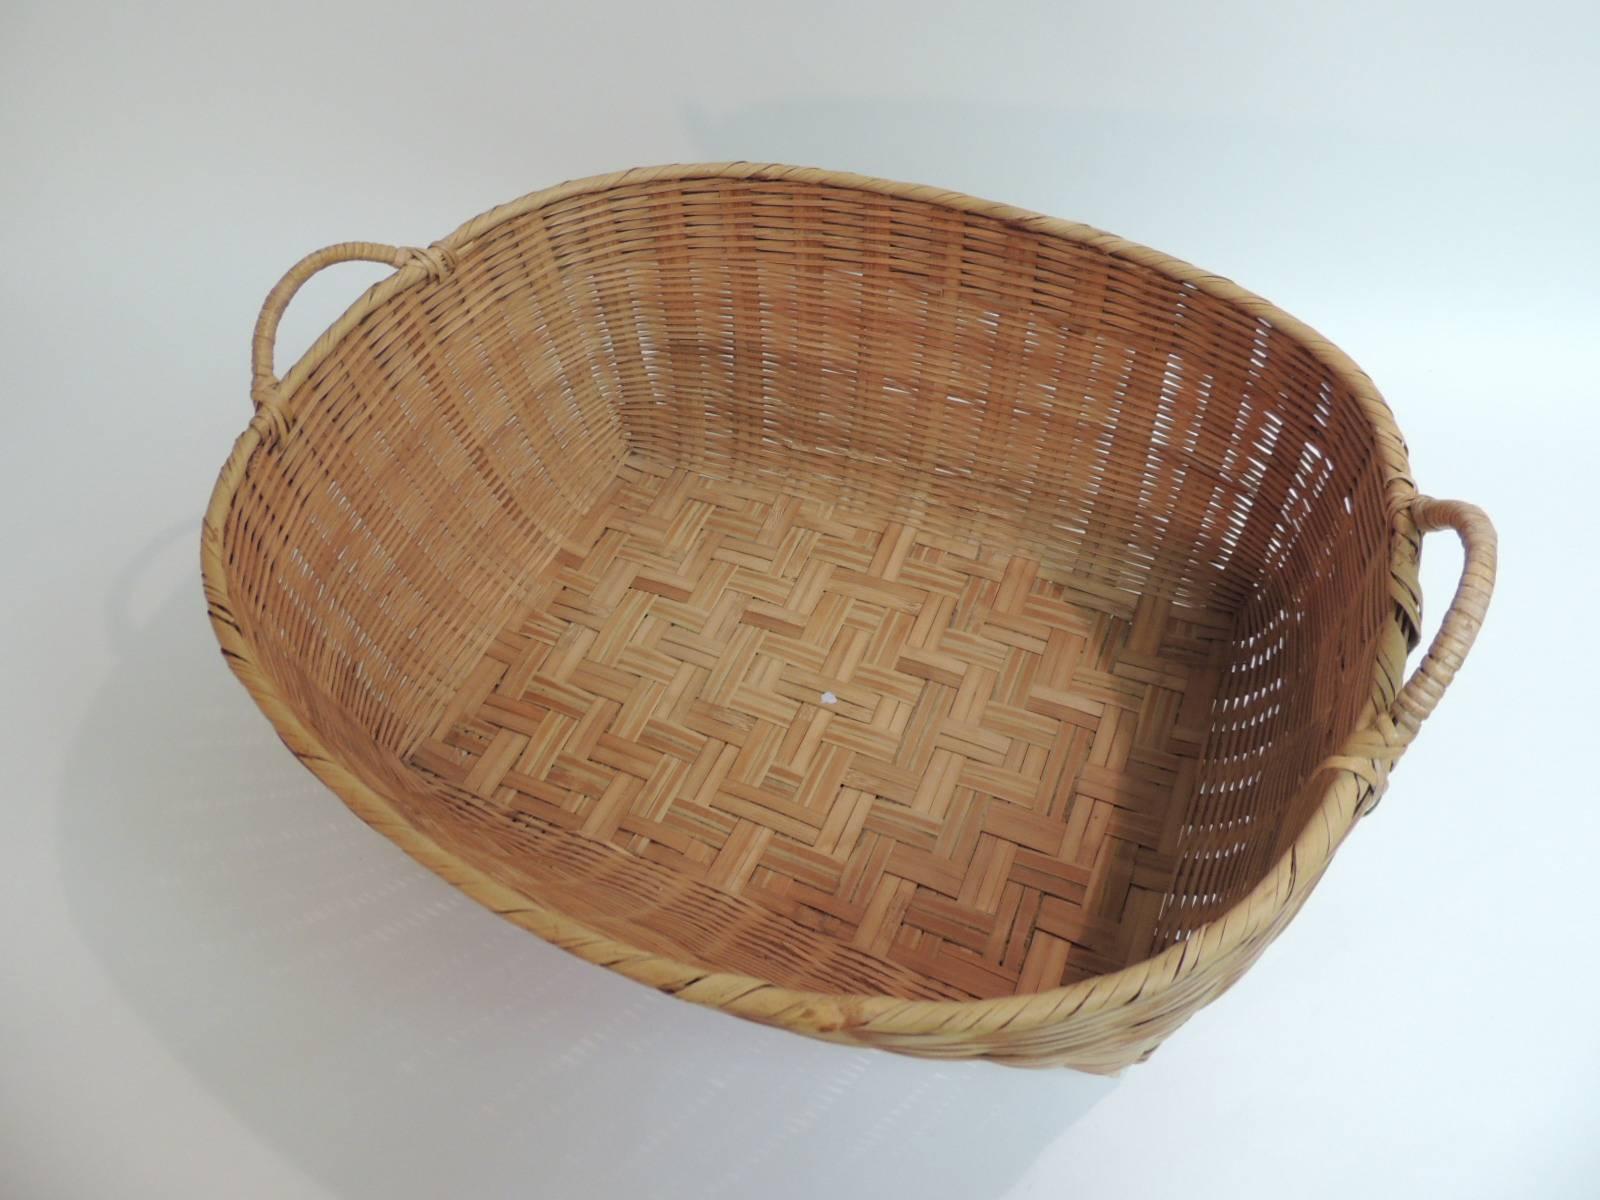 American country oval large wicker woven basket. 
American country woven wicker oval basket. Decorative basket with handles. Large basket with flat wood bottom underside supports. Ideal for magazines as a magazine stand, under a cabinet, for